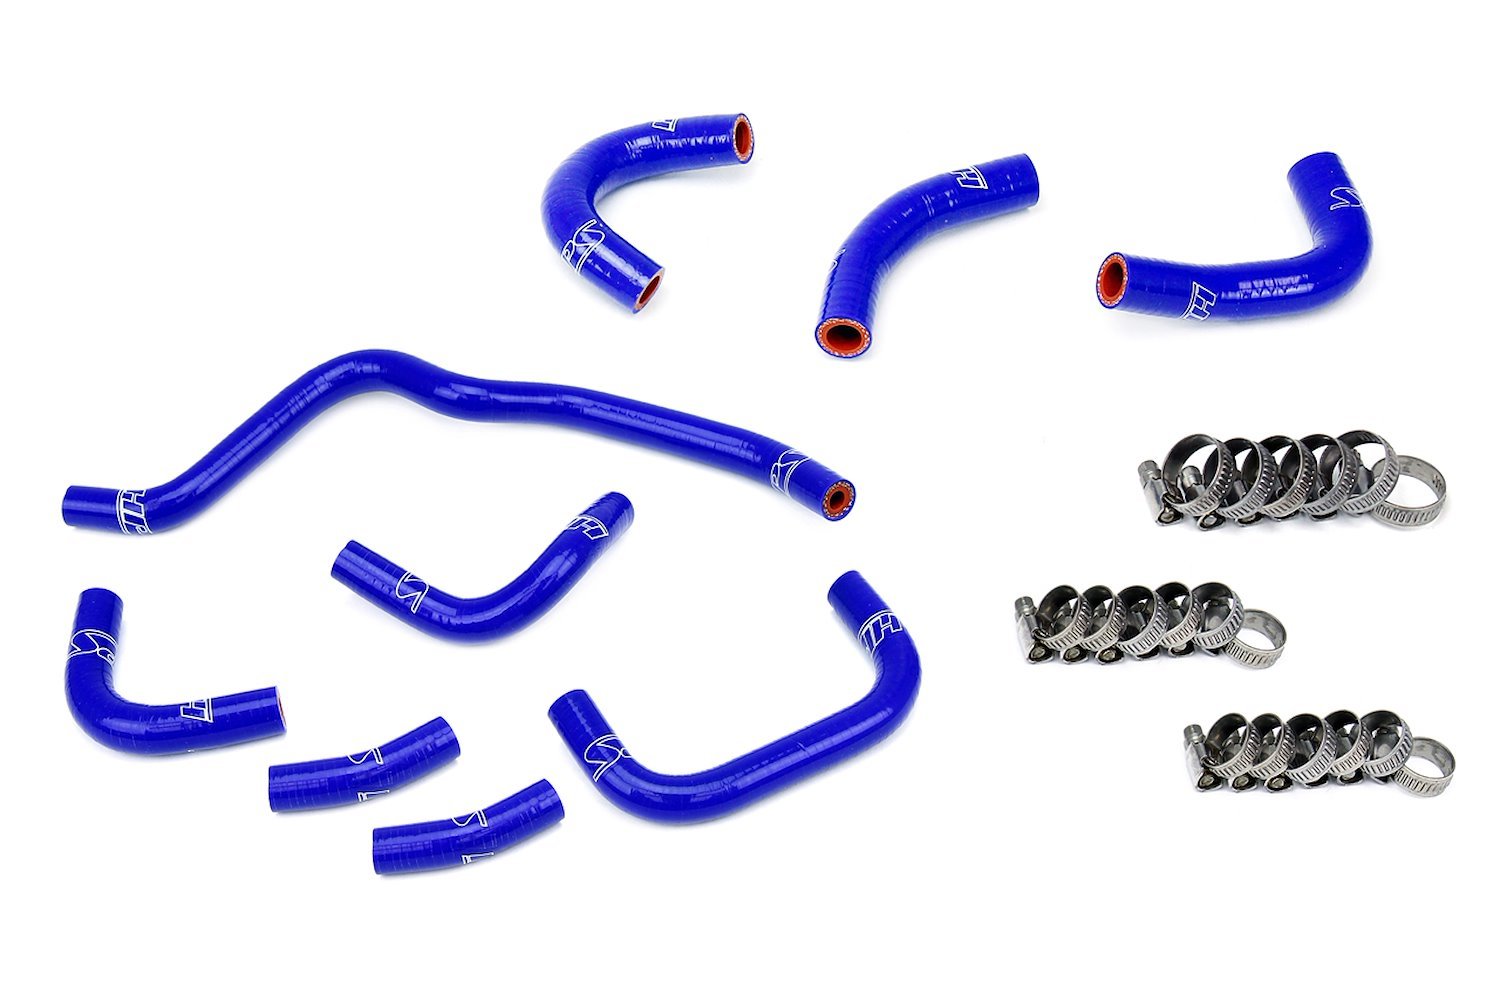 57-2079-BLUE Coolant Hose Kit, 3-Ply Reinforced Silicone, Upgraded Oil Cooler & Throttle Body Coolant Hoses